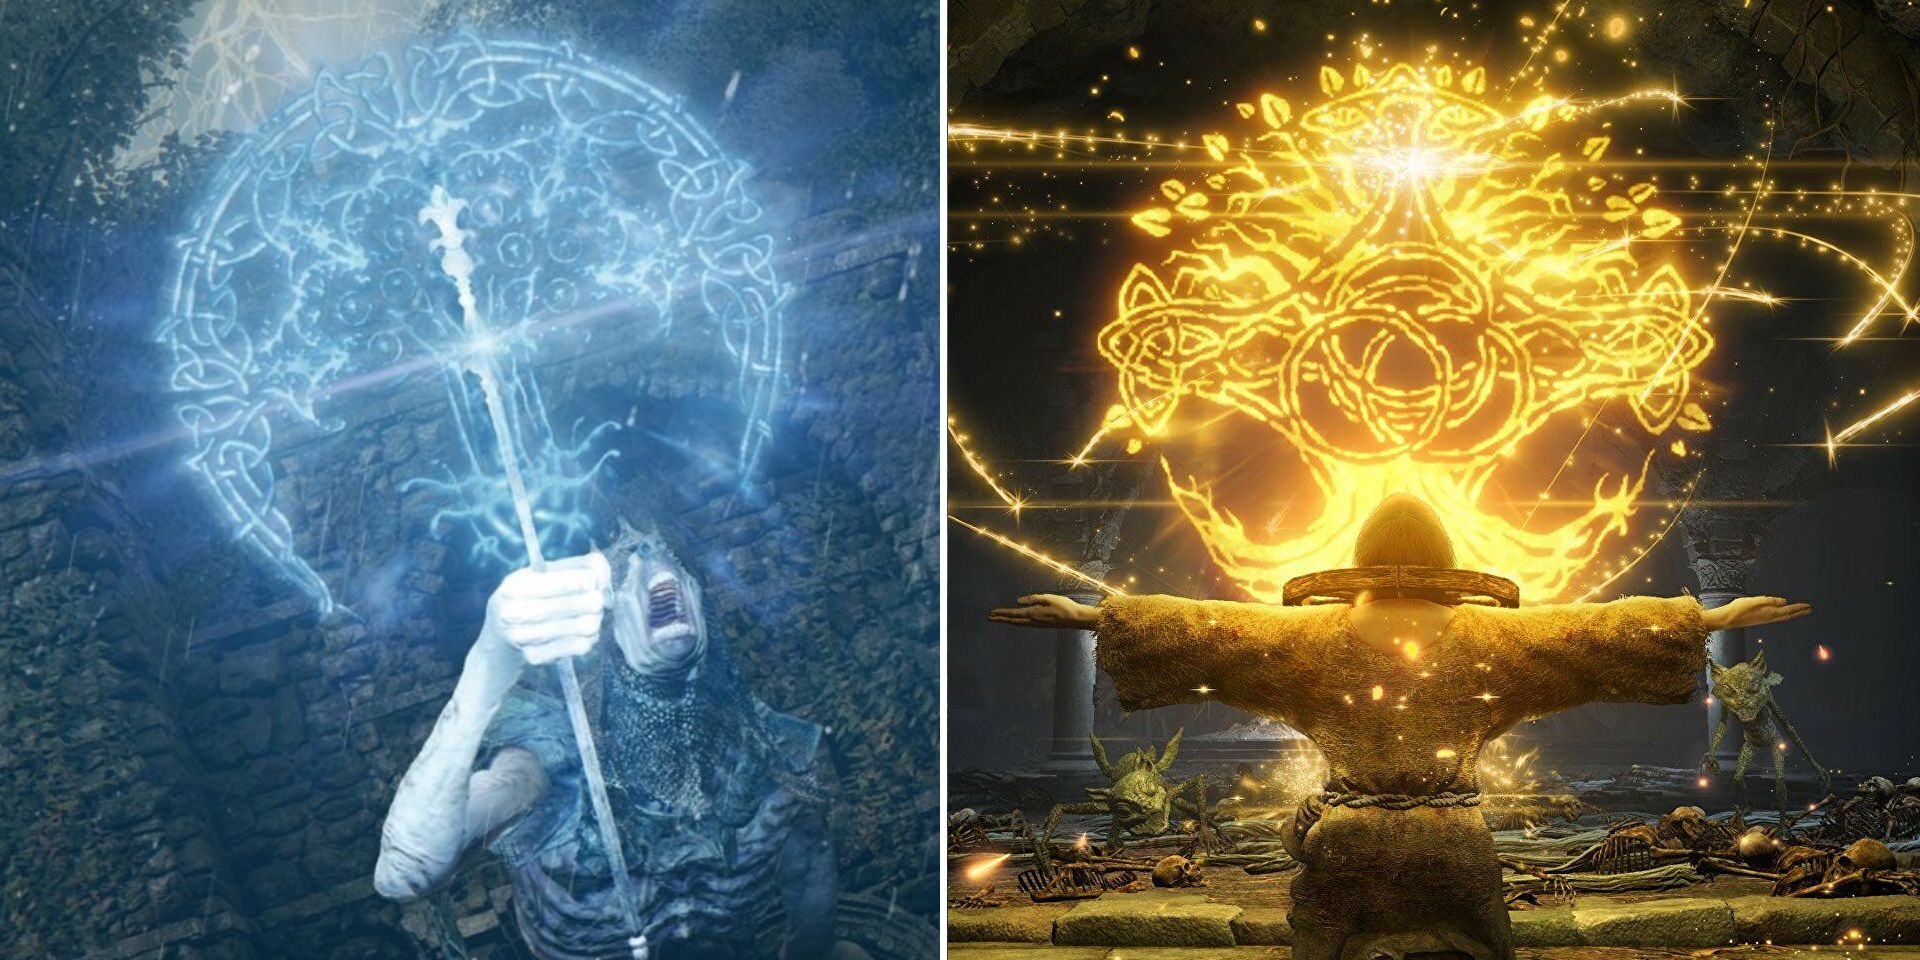 A split image showing two different types of magic in Elden Ring, the blue Glintstone Sorcery on the left, and the golden lights of Incantations on the right.